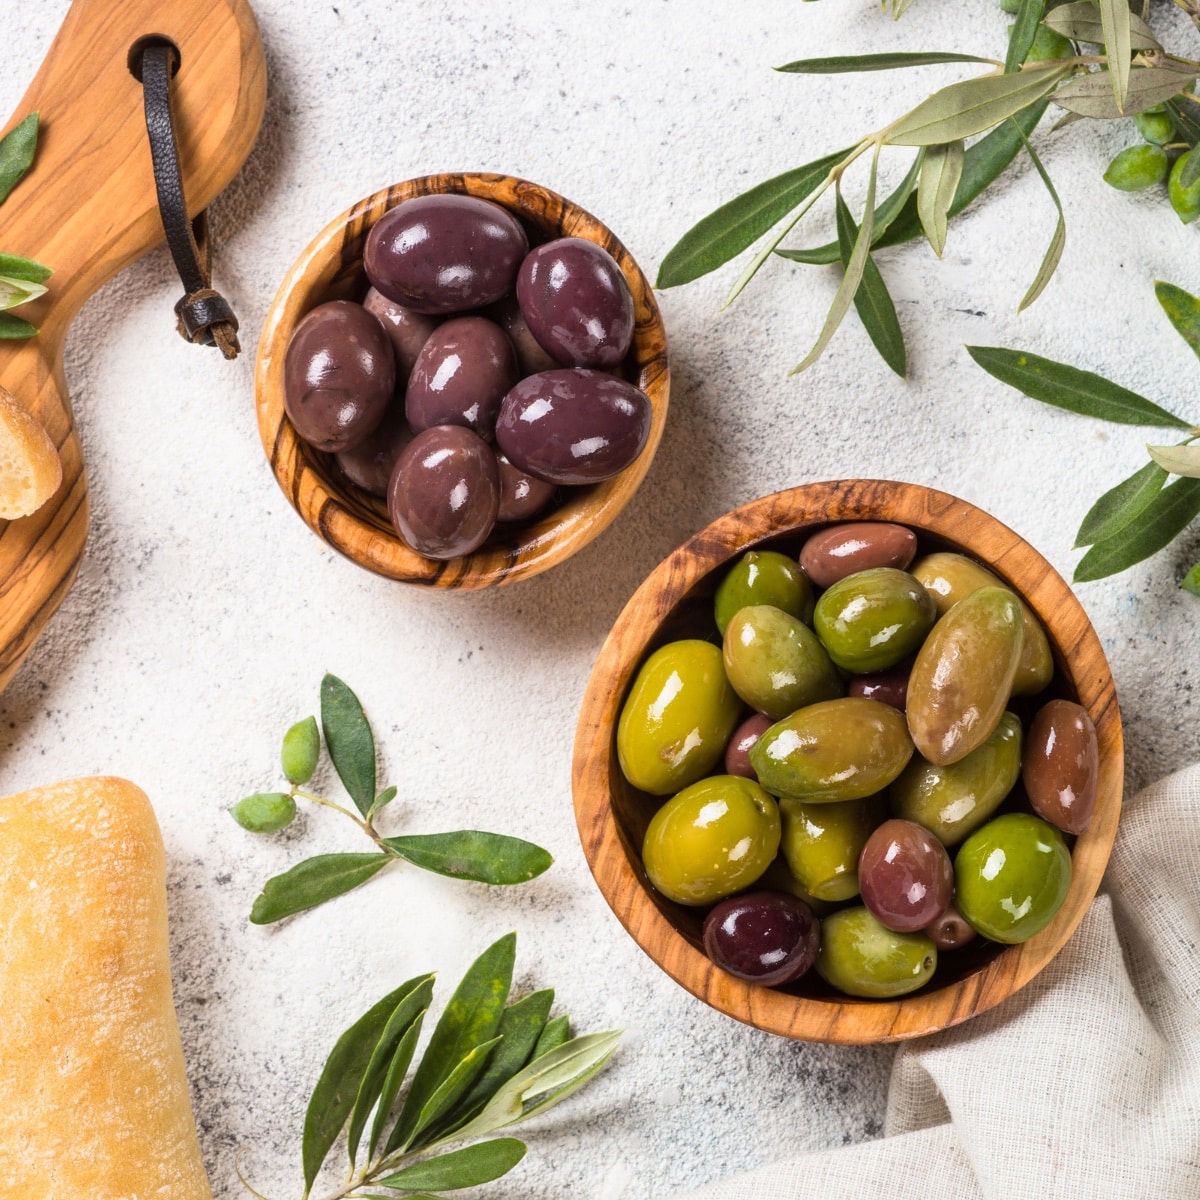 Green olives in a wooden bowl and black olives in a wooden bowl sitting on a white table. 